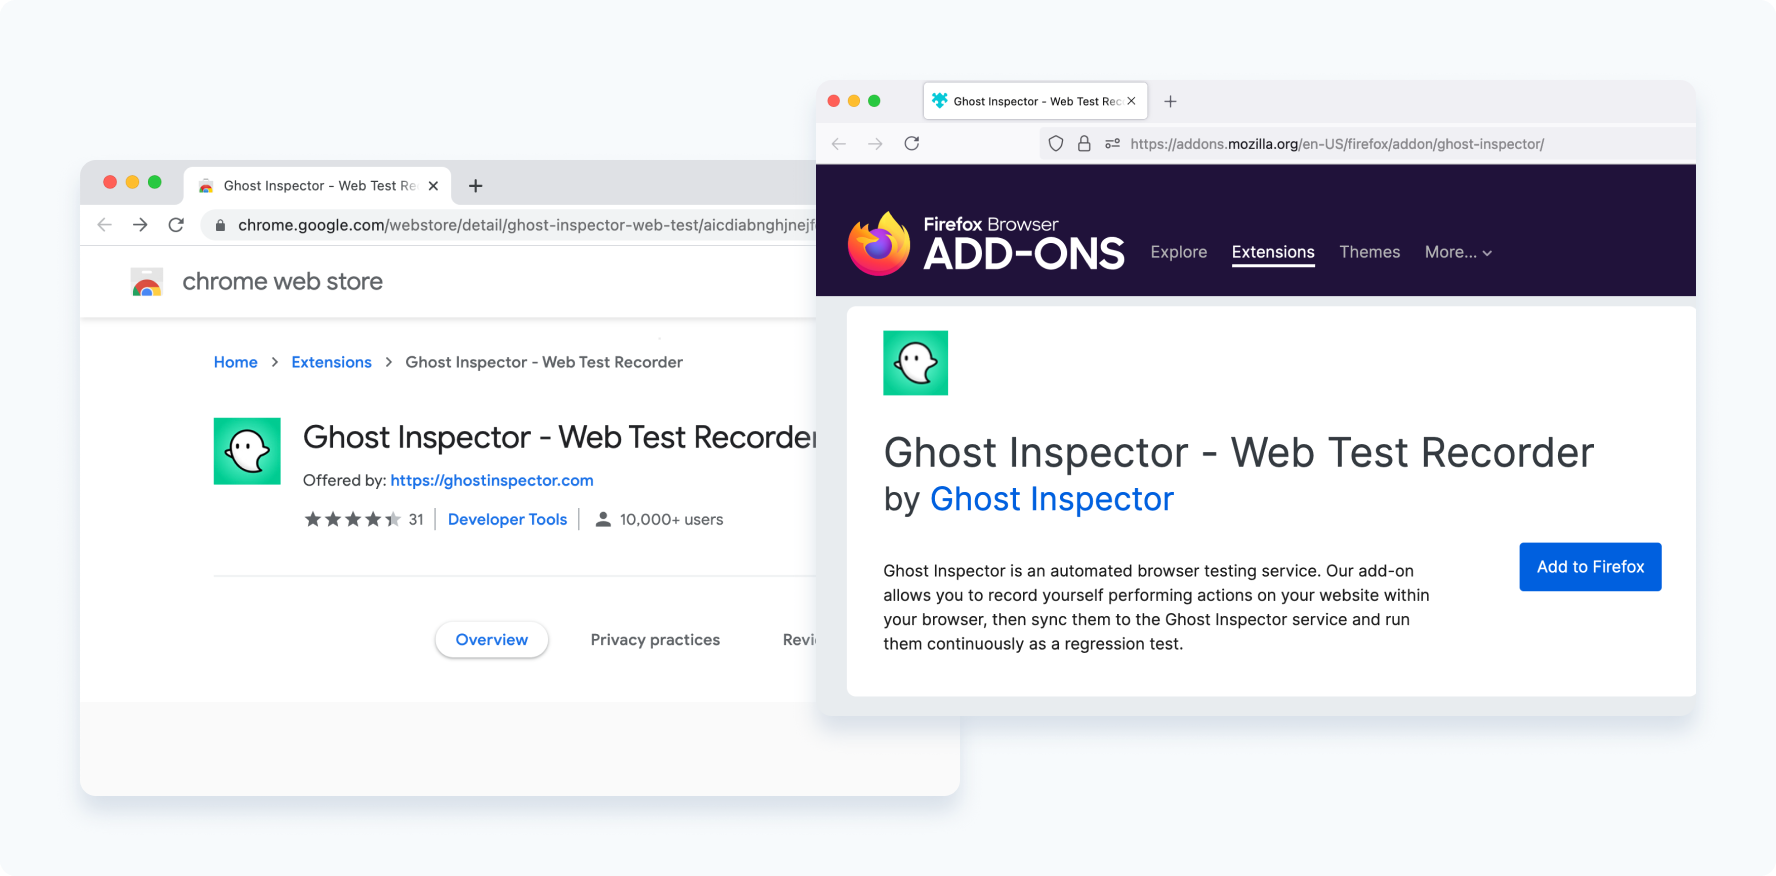 Ghost Inspector Chrome and Firefox add-on pages